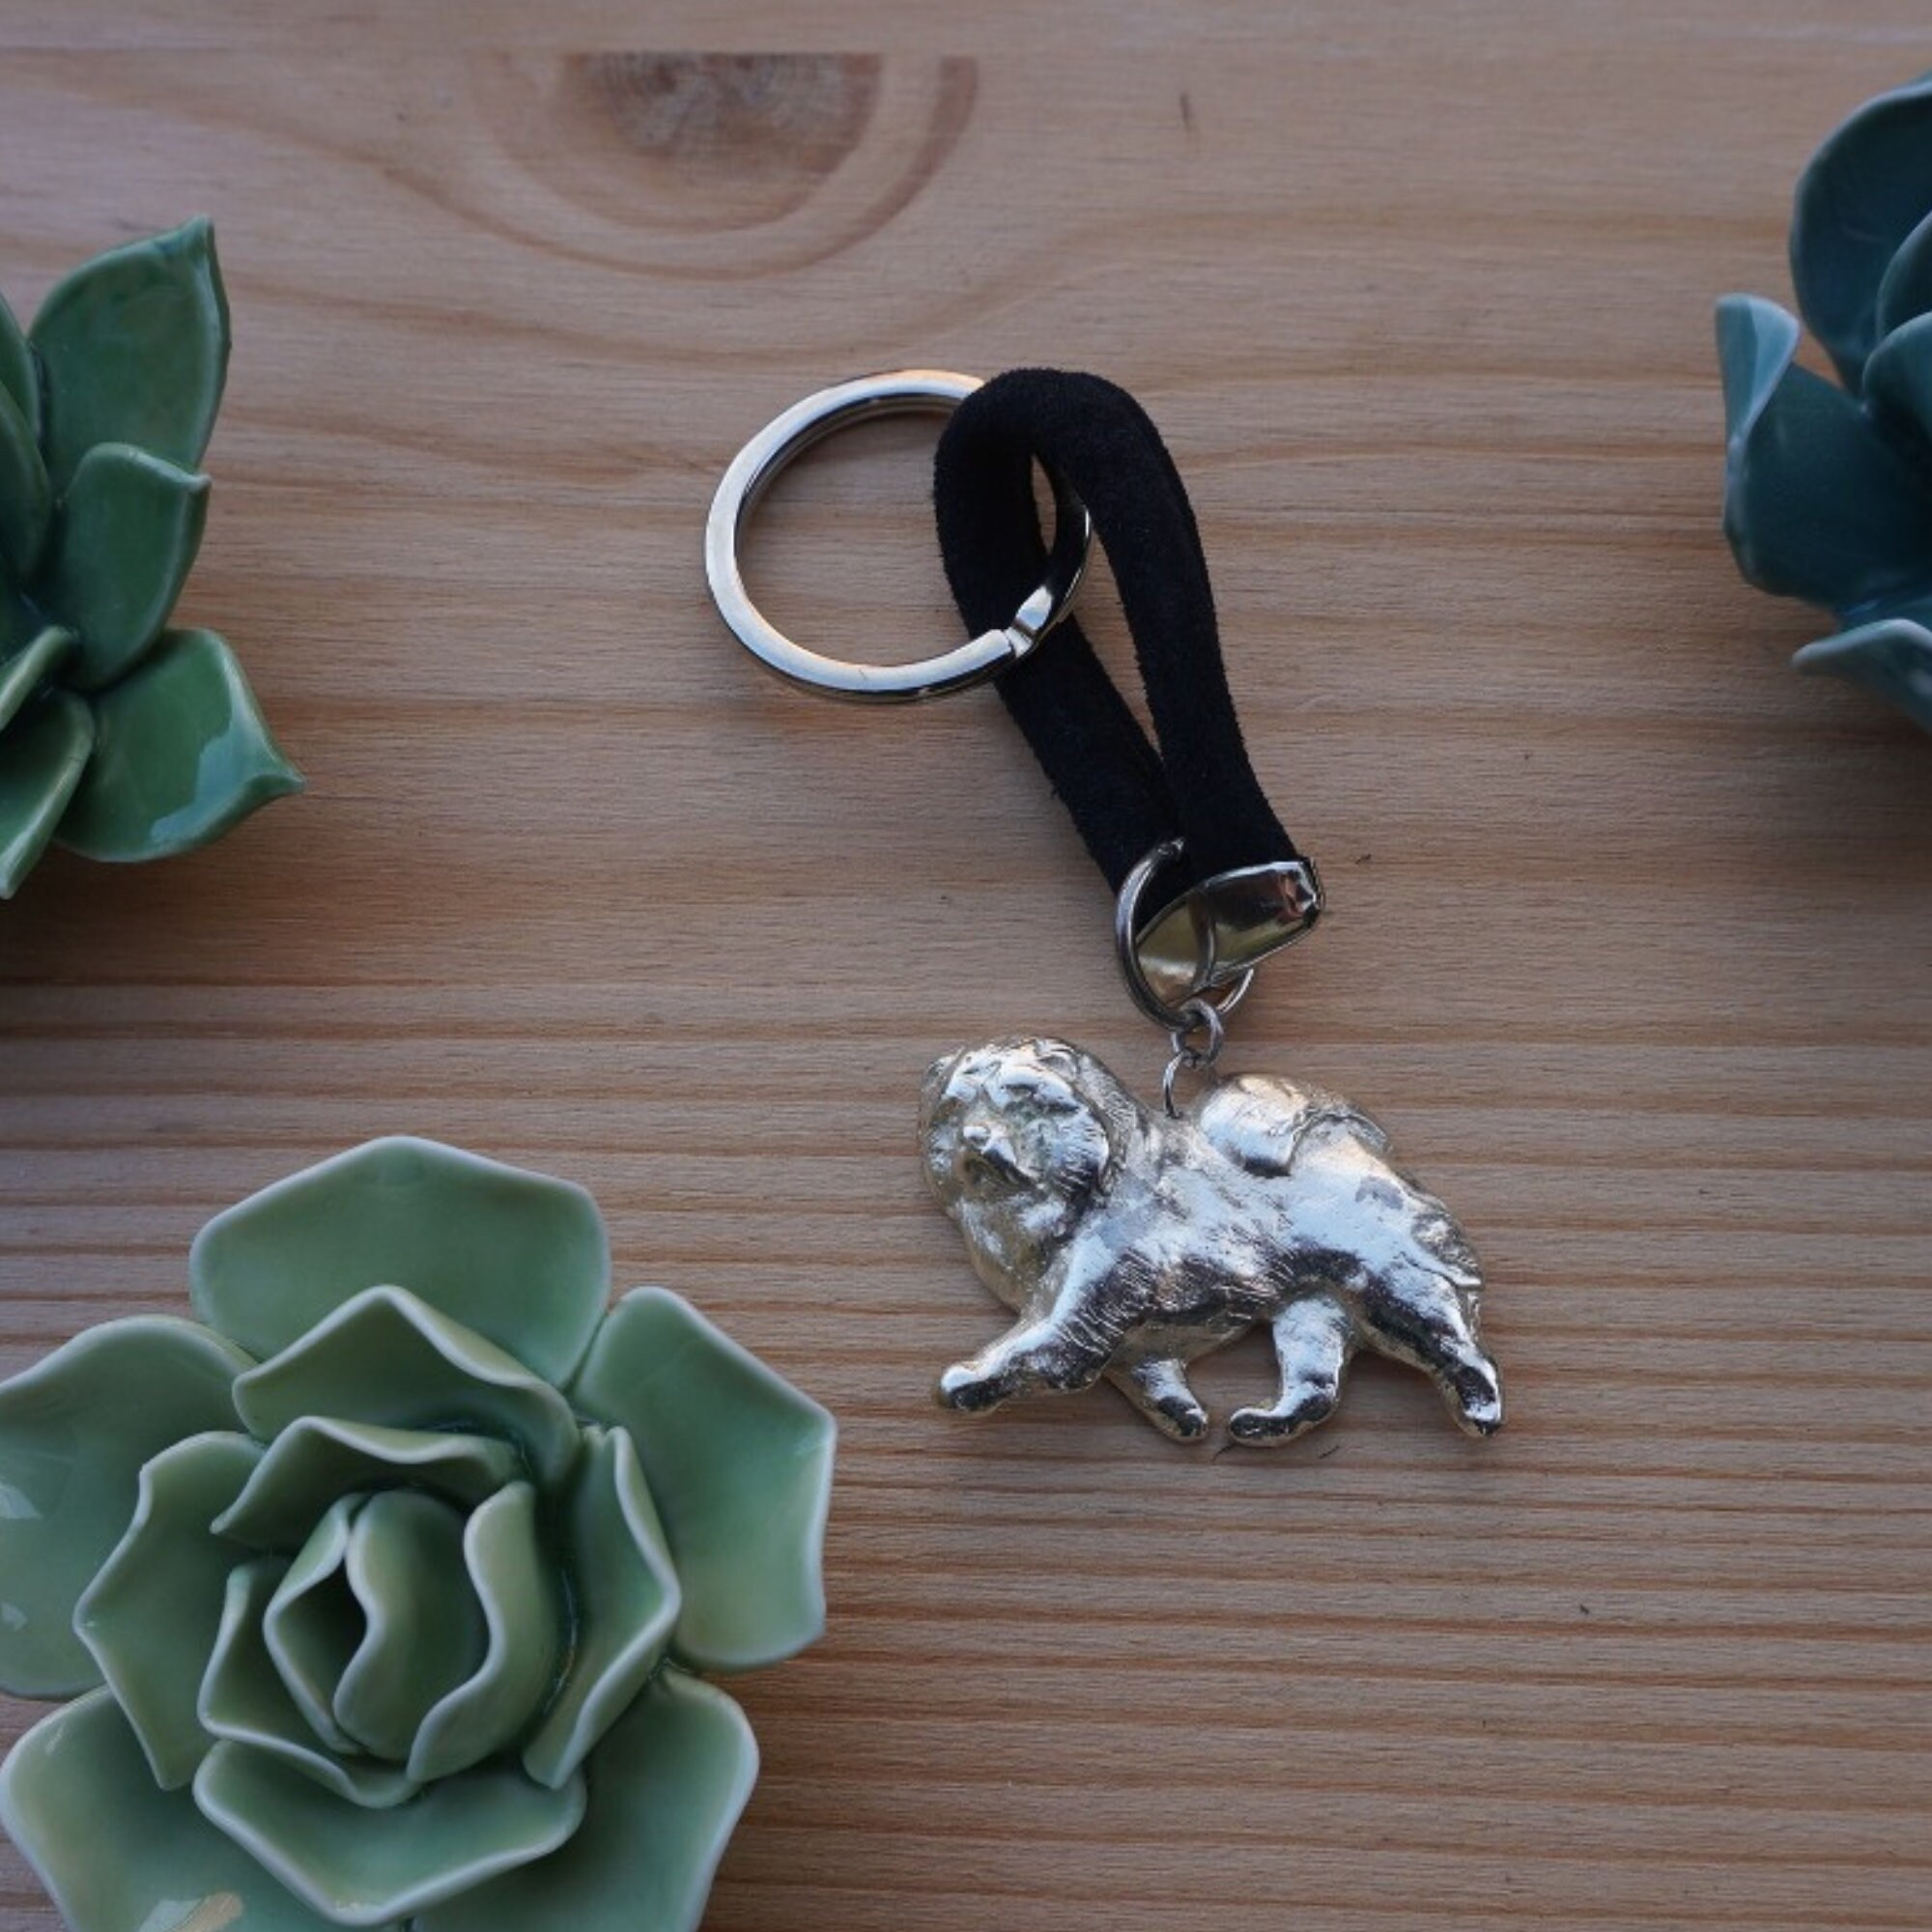 Custom made poodle and chow chow dog keychain ••• ♡ 100% handcut